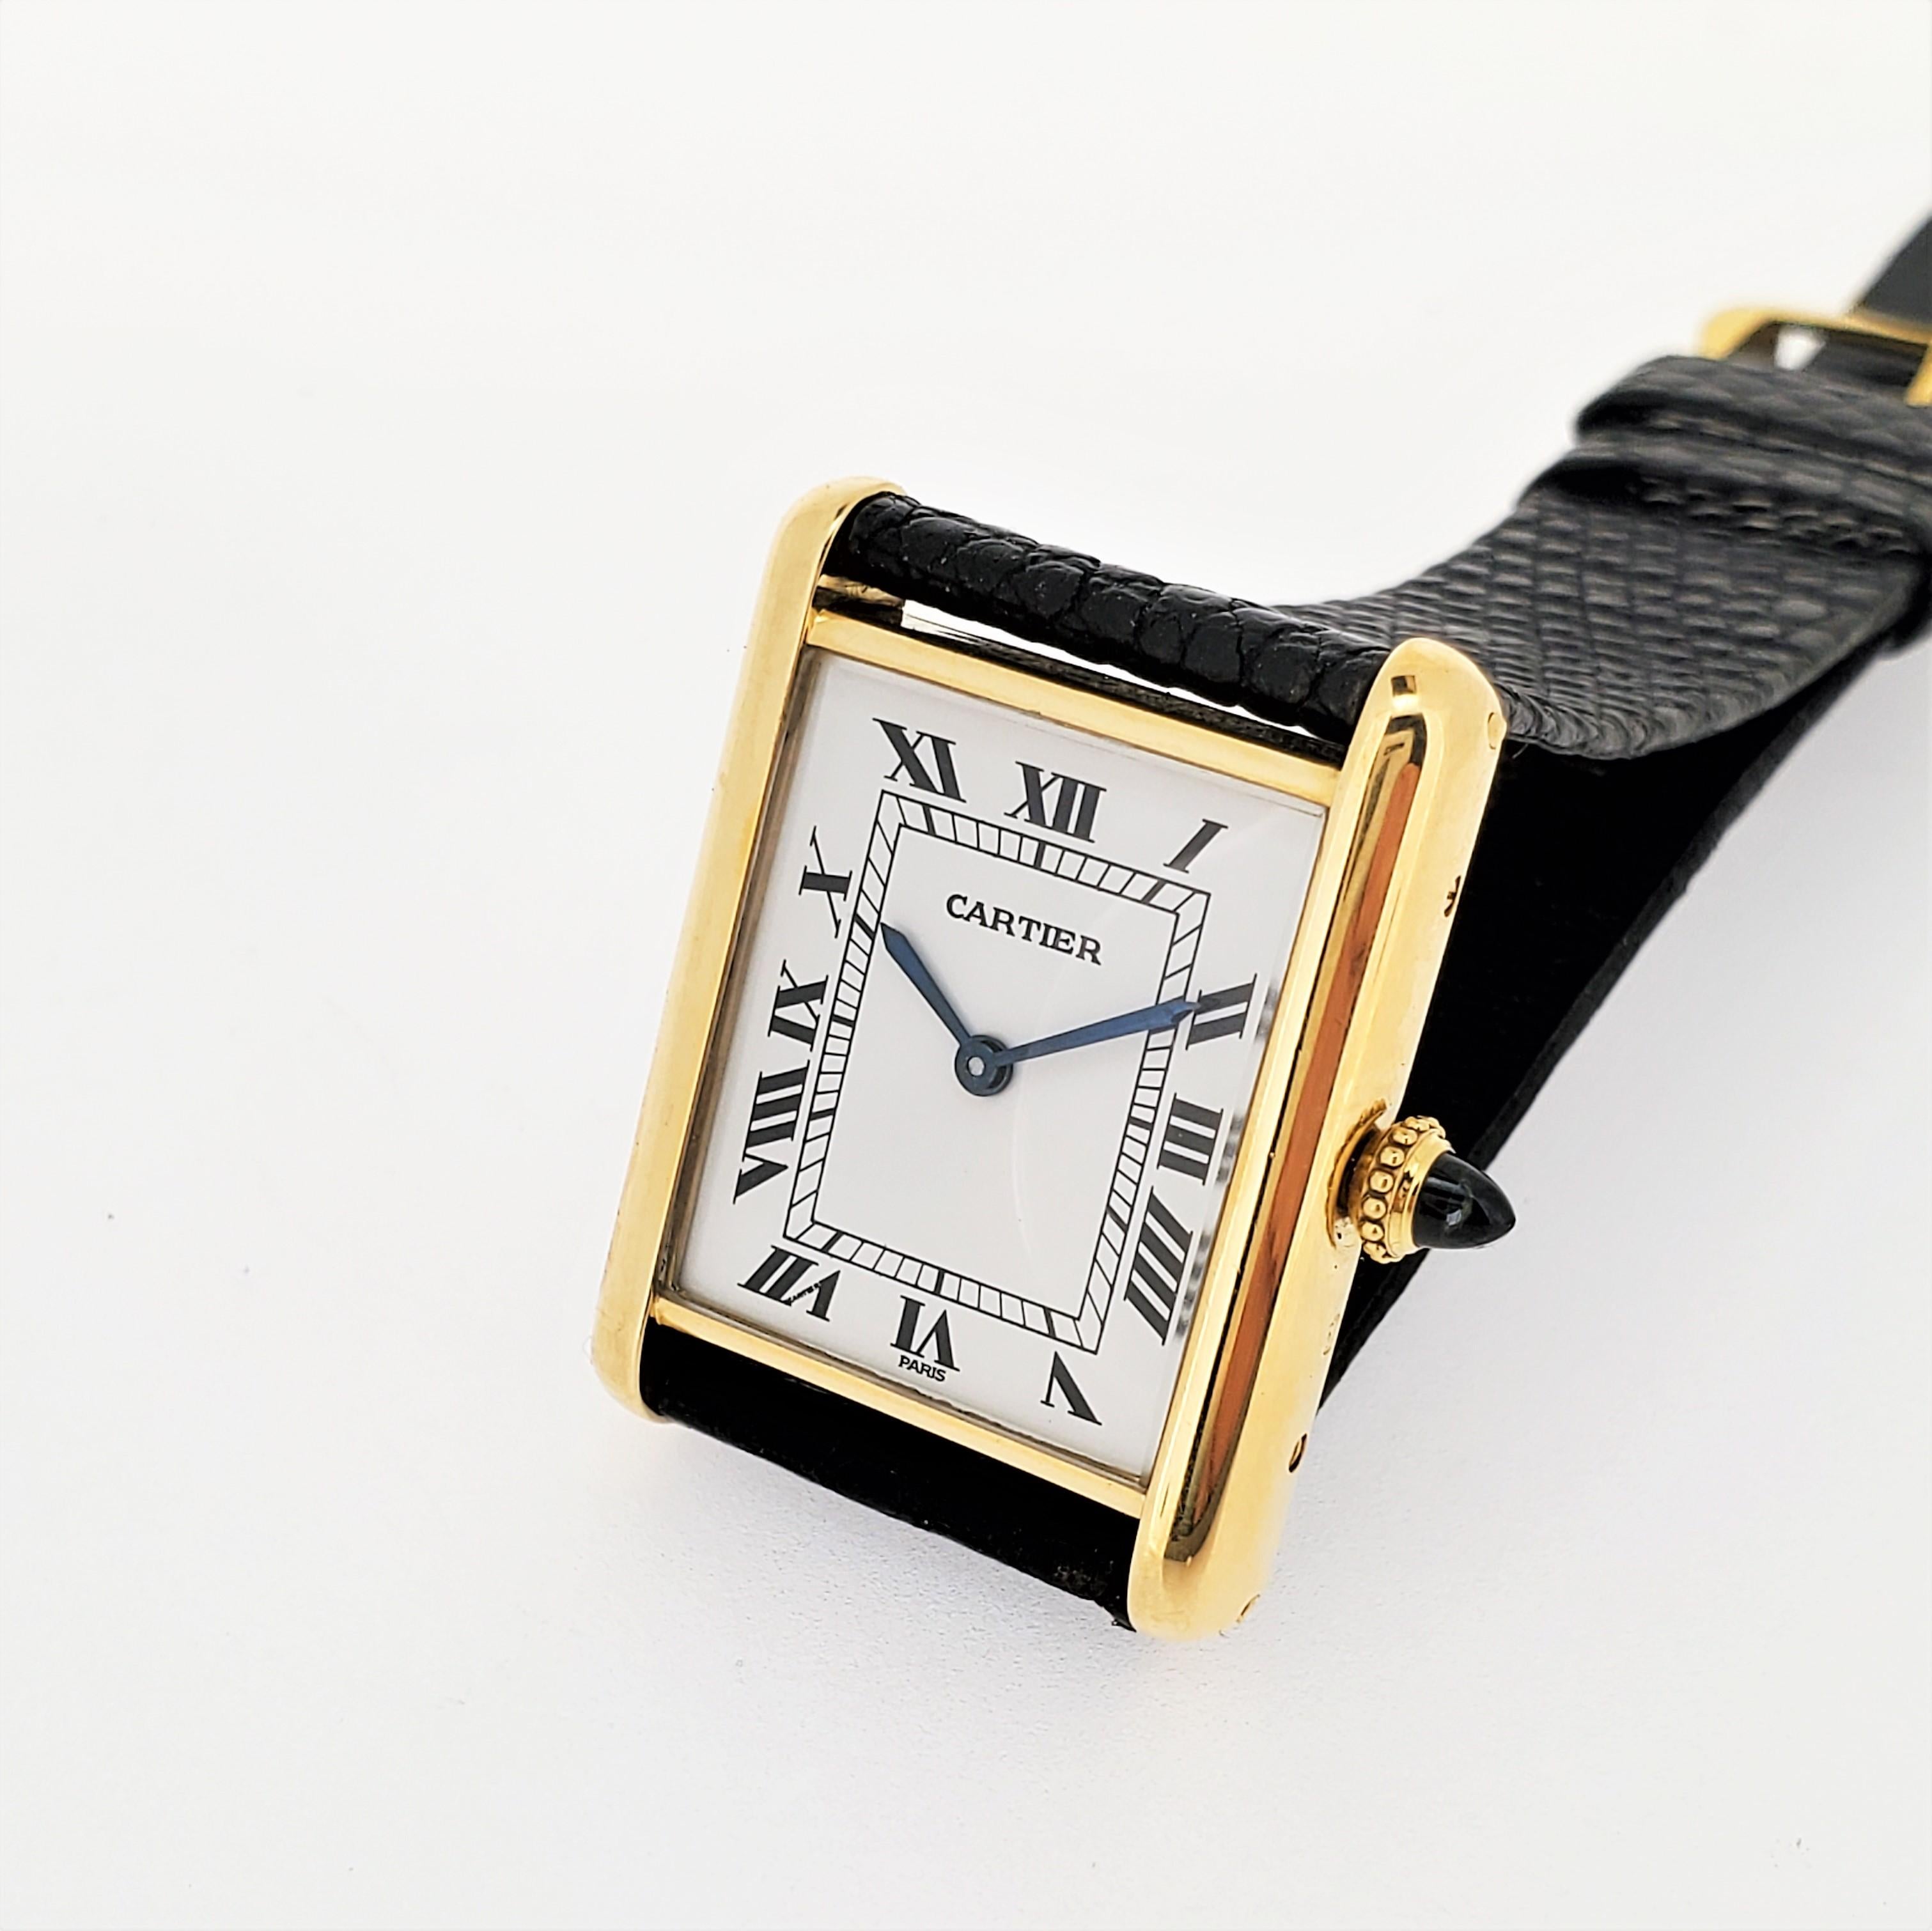 Introduction:
This Vintage Cartier Paris Tank Watch is made in 18 Karat yellow gold and measures 30 x 25 mm with a 17-Jewel Cartier  mechanical manual wind movement.  It has the original black lizard strap with 18K Cartier buckle.  It is triple